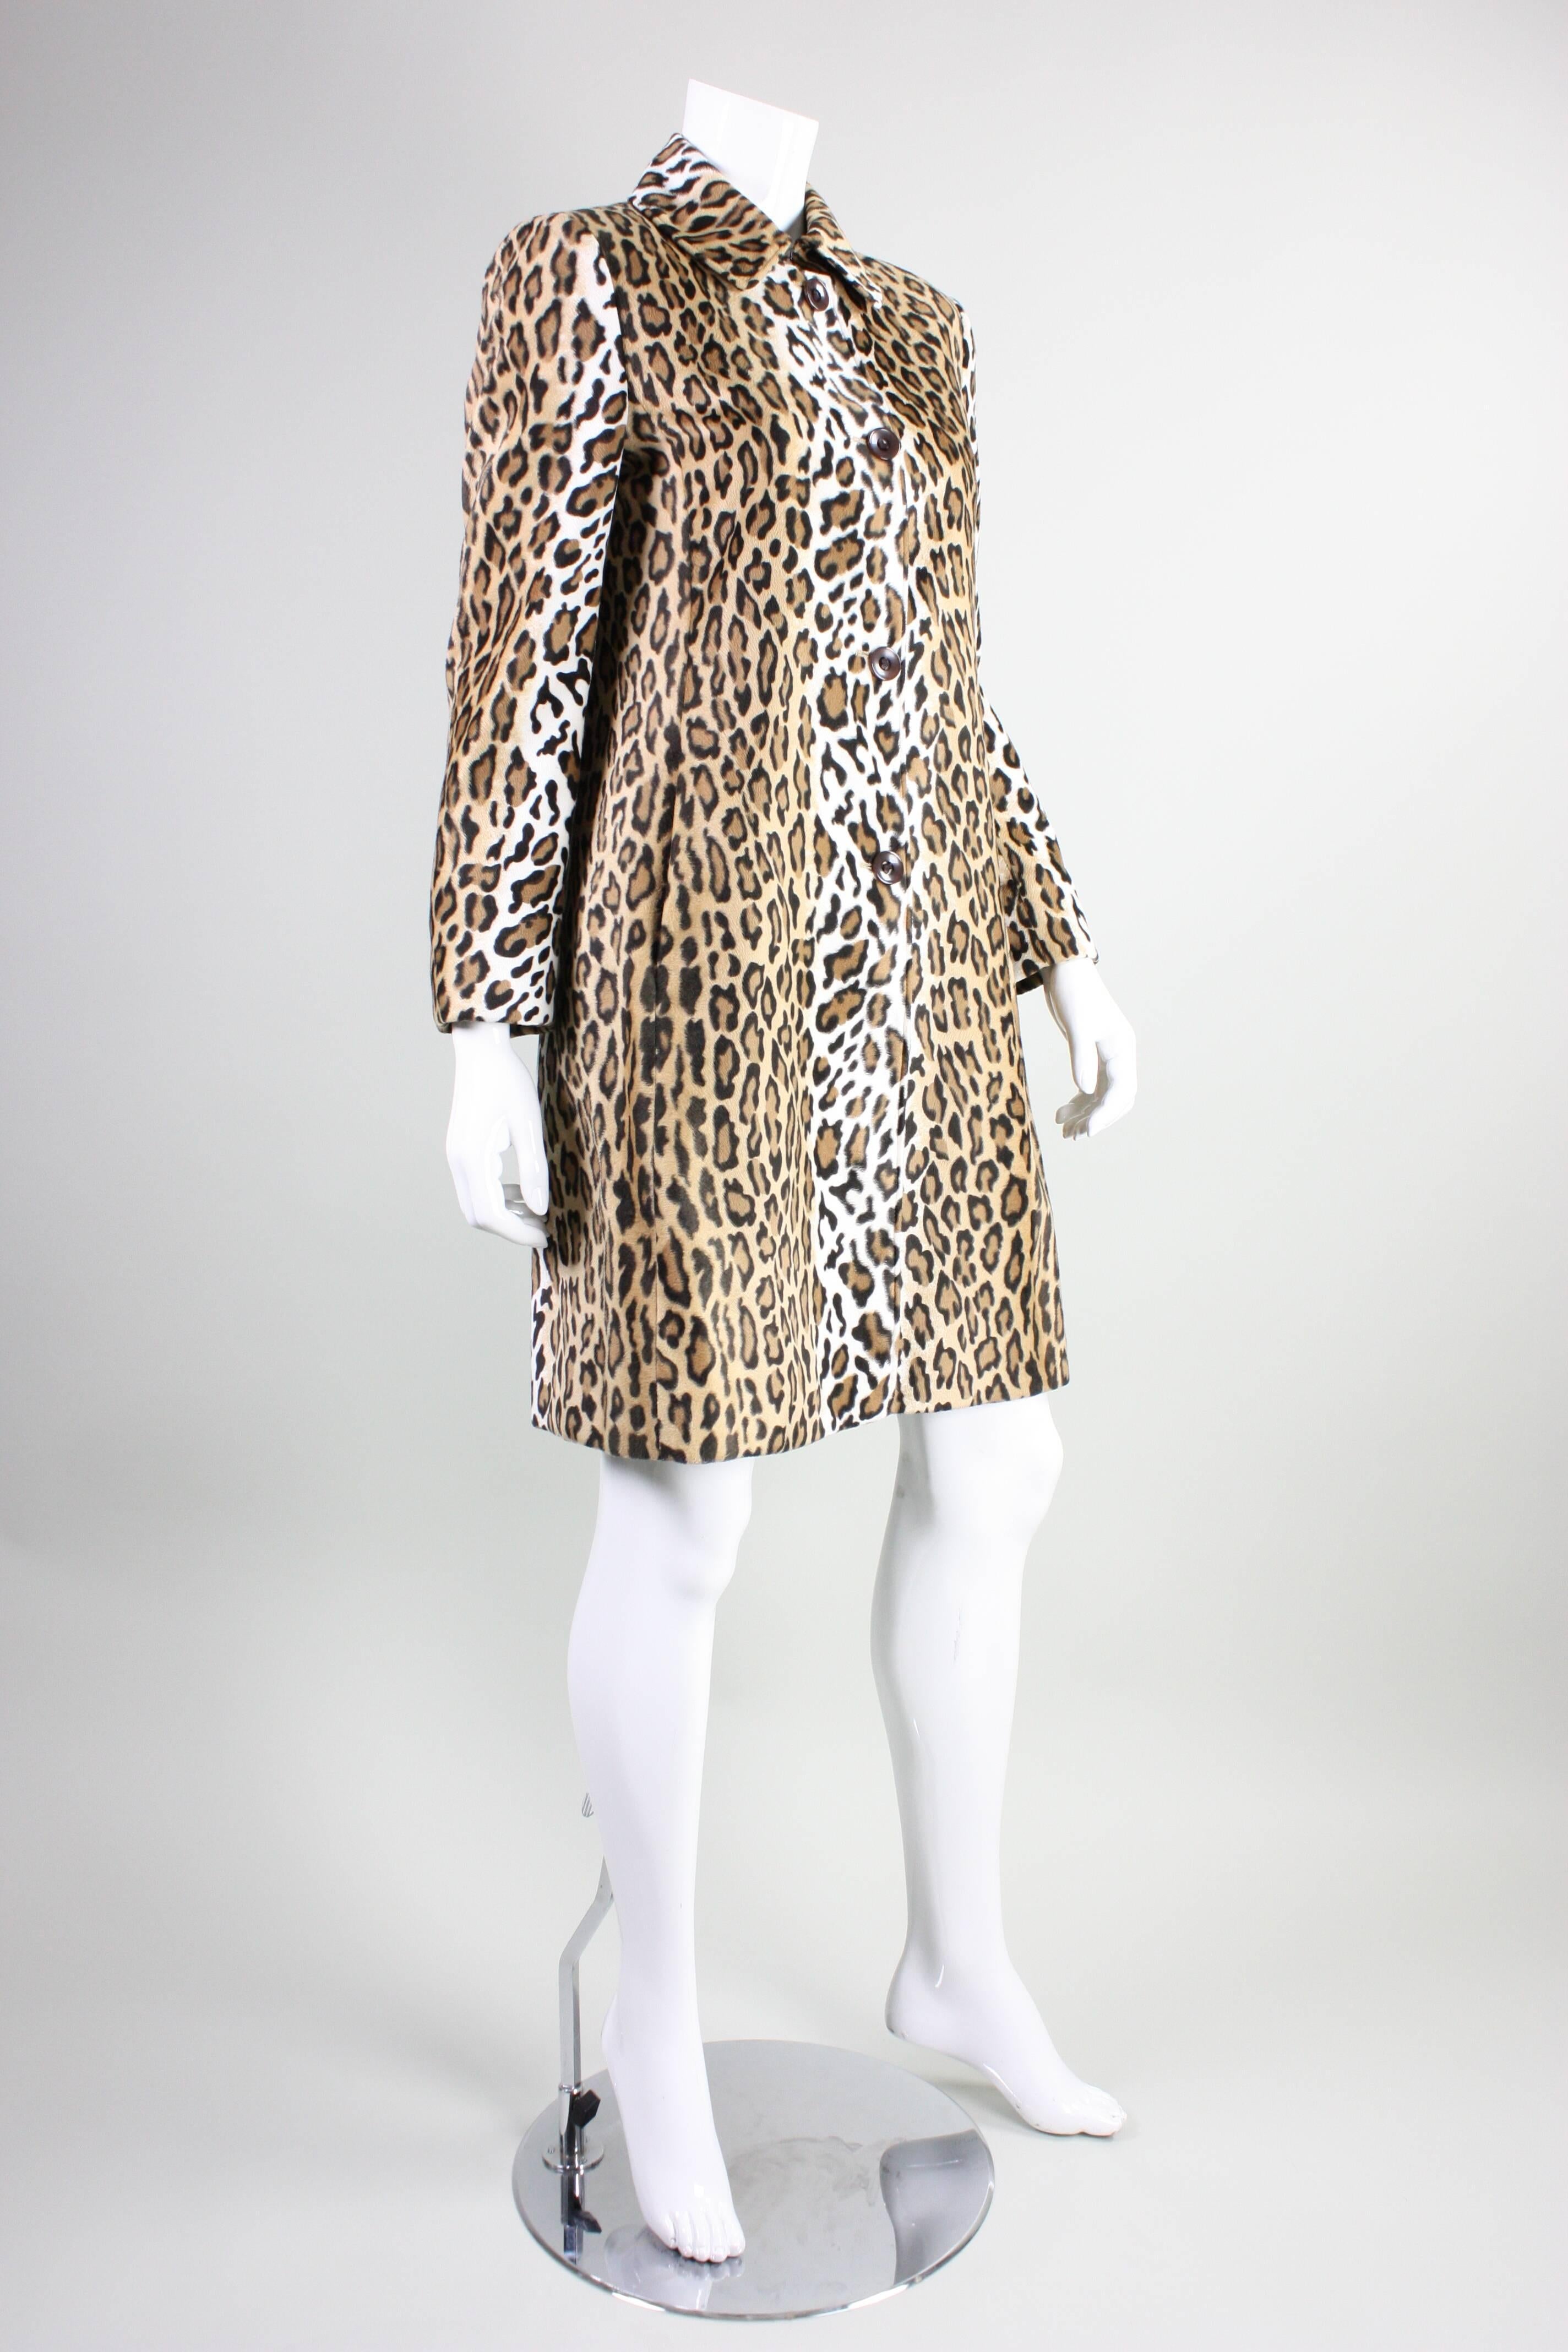 Vintage Moschino Faux Leopard coat dates to the 1990's and is made of a poly-rayon blend.  Single breasted with turn down collar and four center front button closures.  Heart cutouts in buttons.  18 1/2